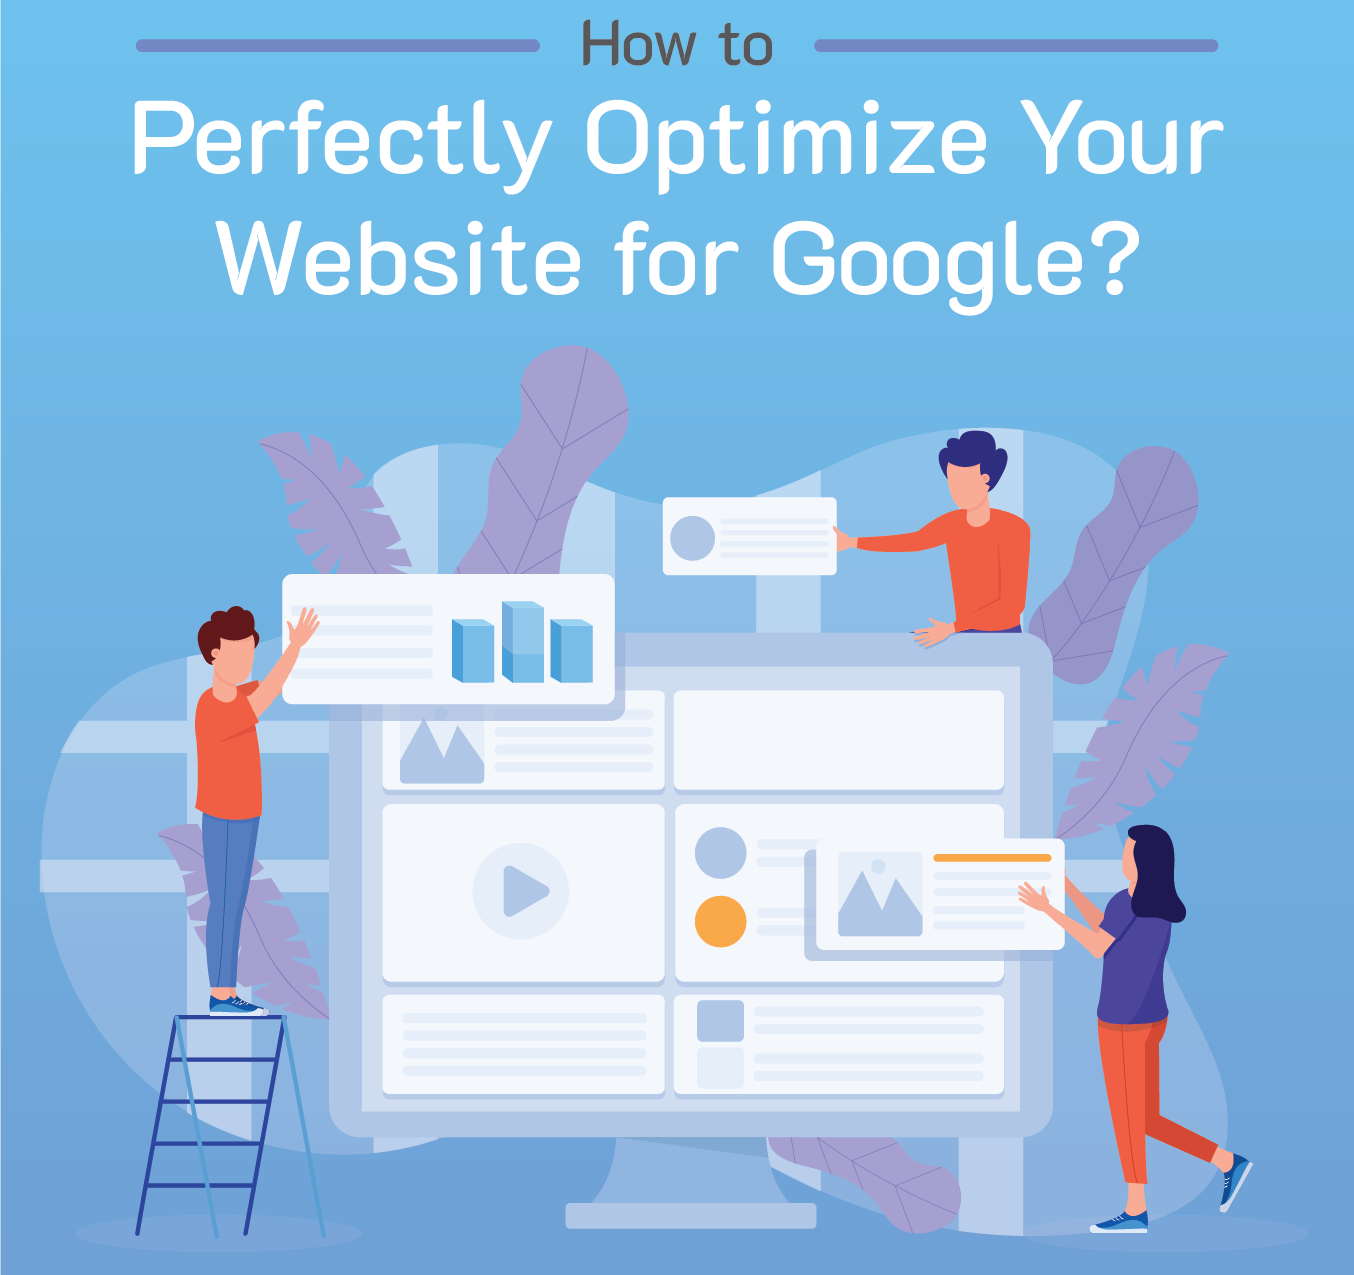 How to Perfectly Optimize Your Website for Google